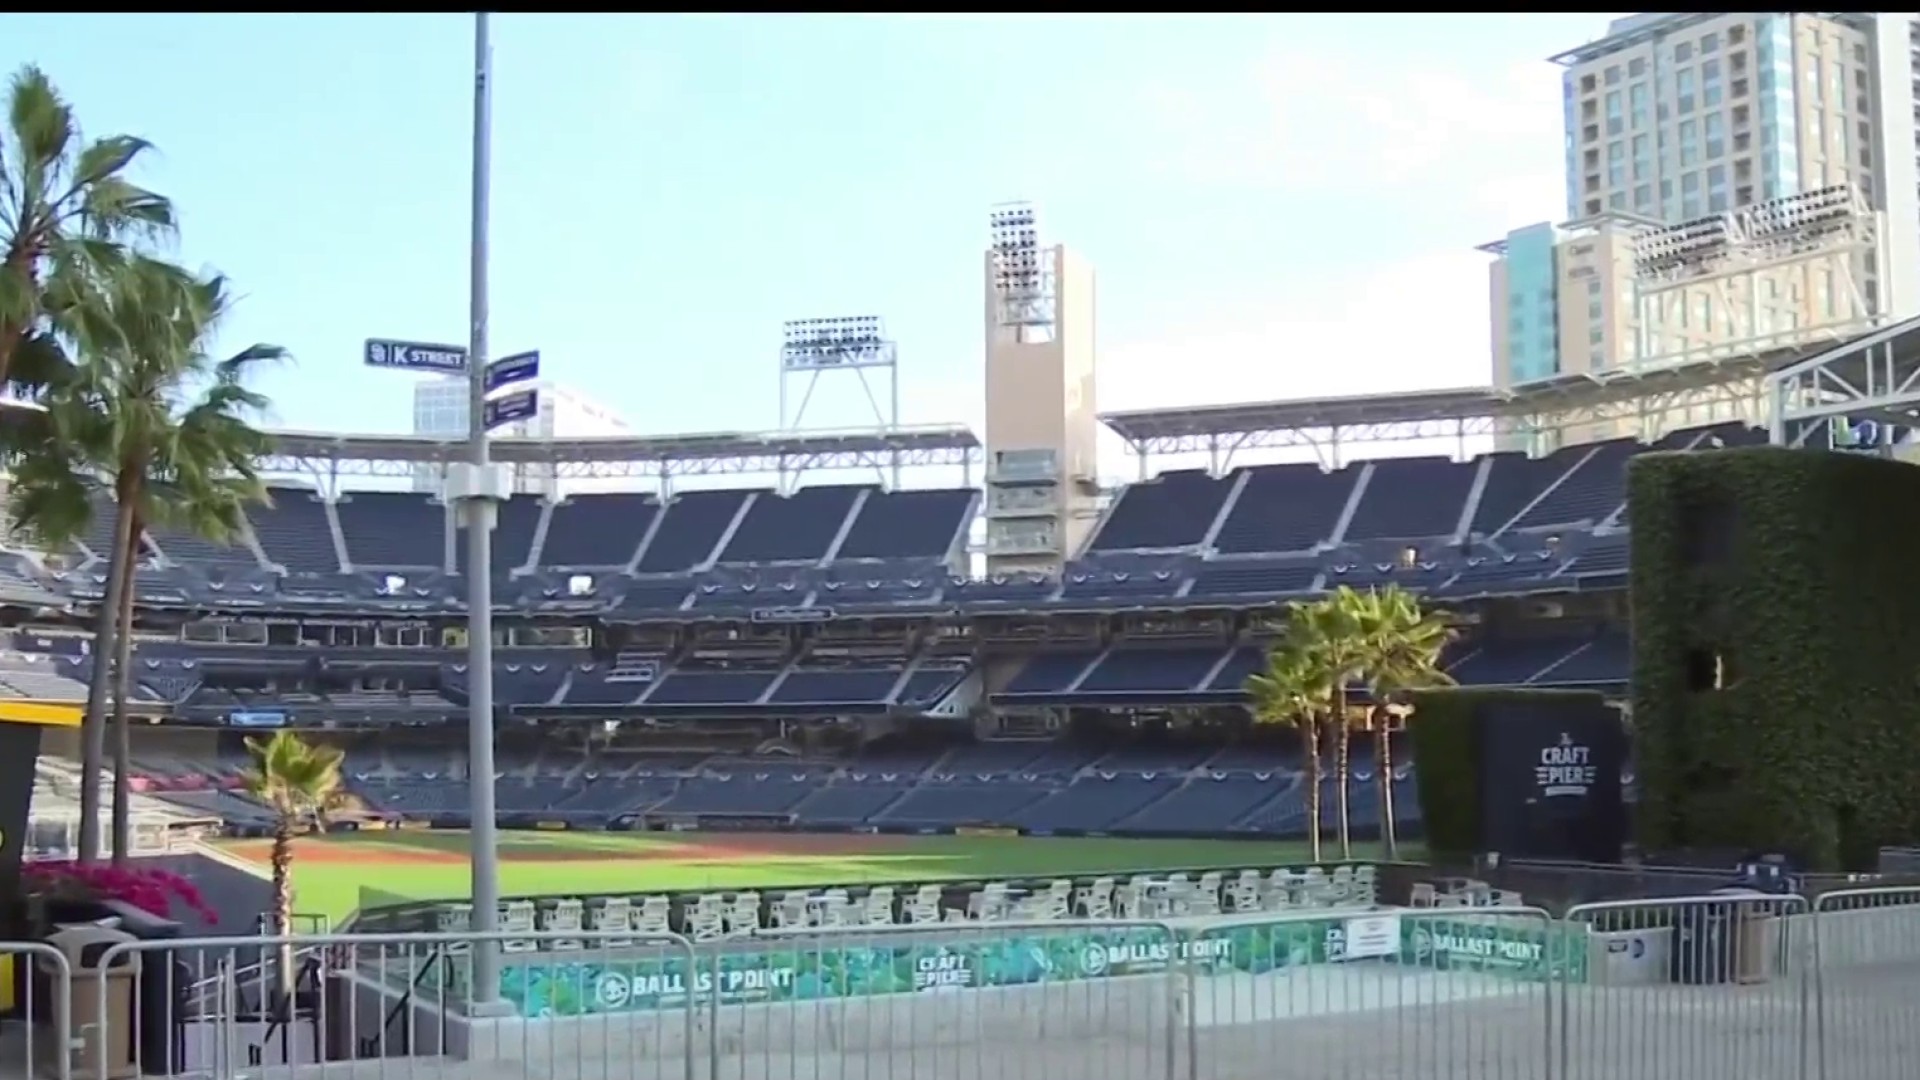 The Point at PETCO Park 